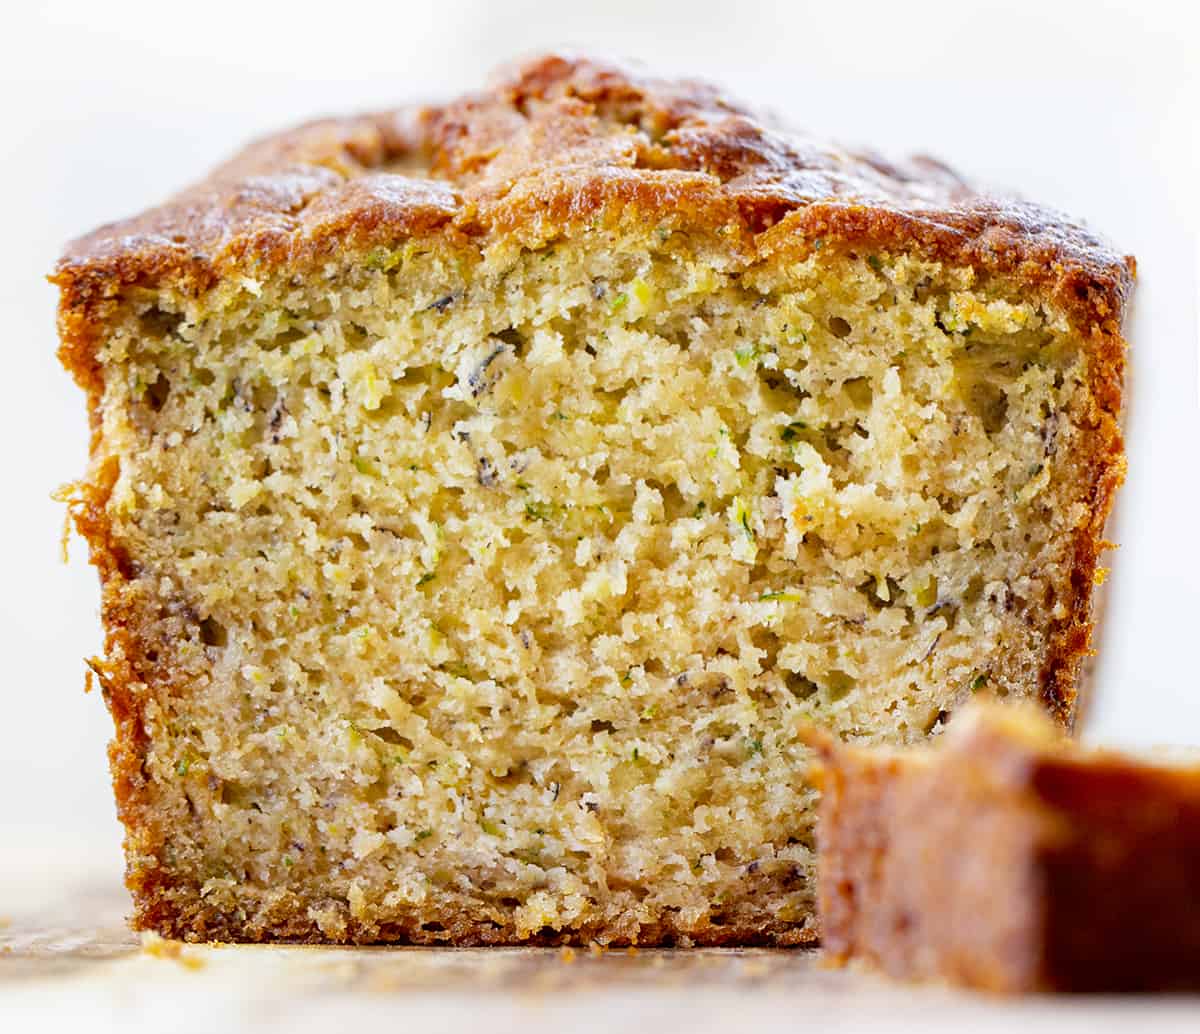 Loaf of Cut Into Banana Zucchini Bread Showing Inside. Quick Bread, Banana Bread, Zucchini Bread, Baking, Zucchini Recipes, How to Bake with Zucchini, Easy Bread Recipe, Easy Zucchini Bread, Dessert, Snack, i am baker, iambaker